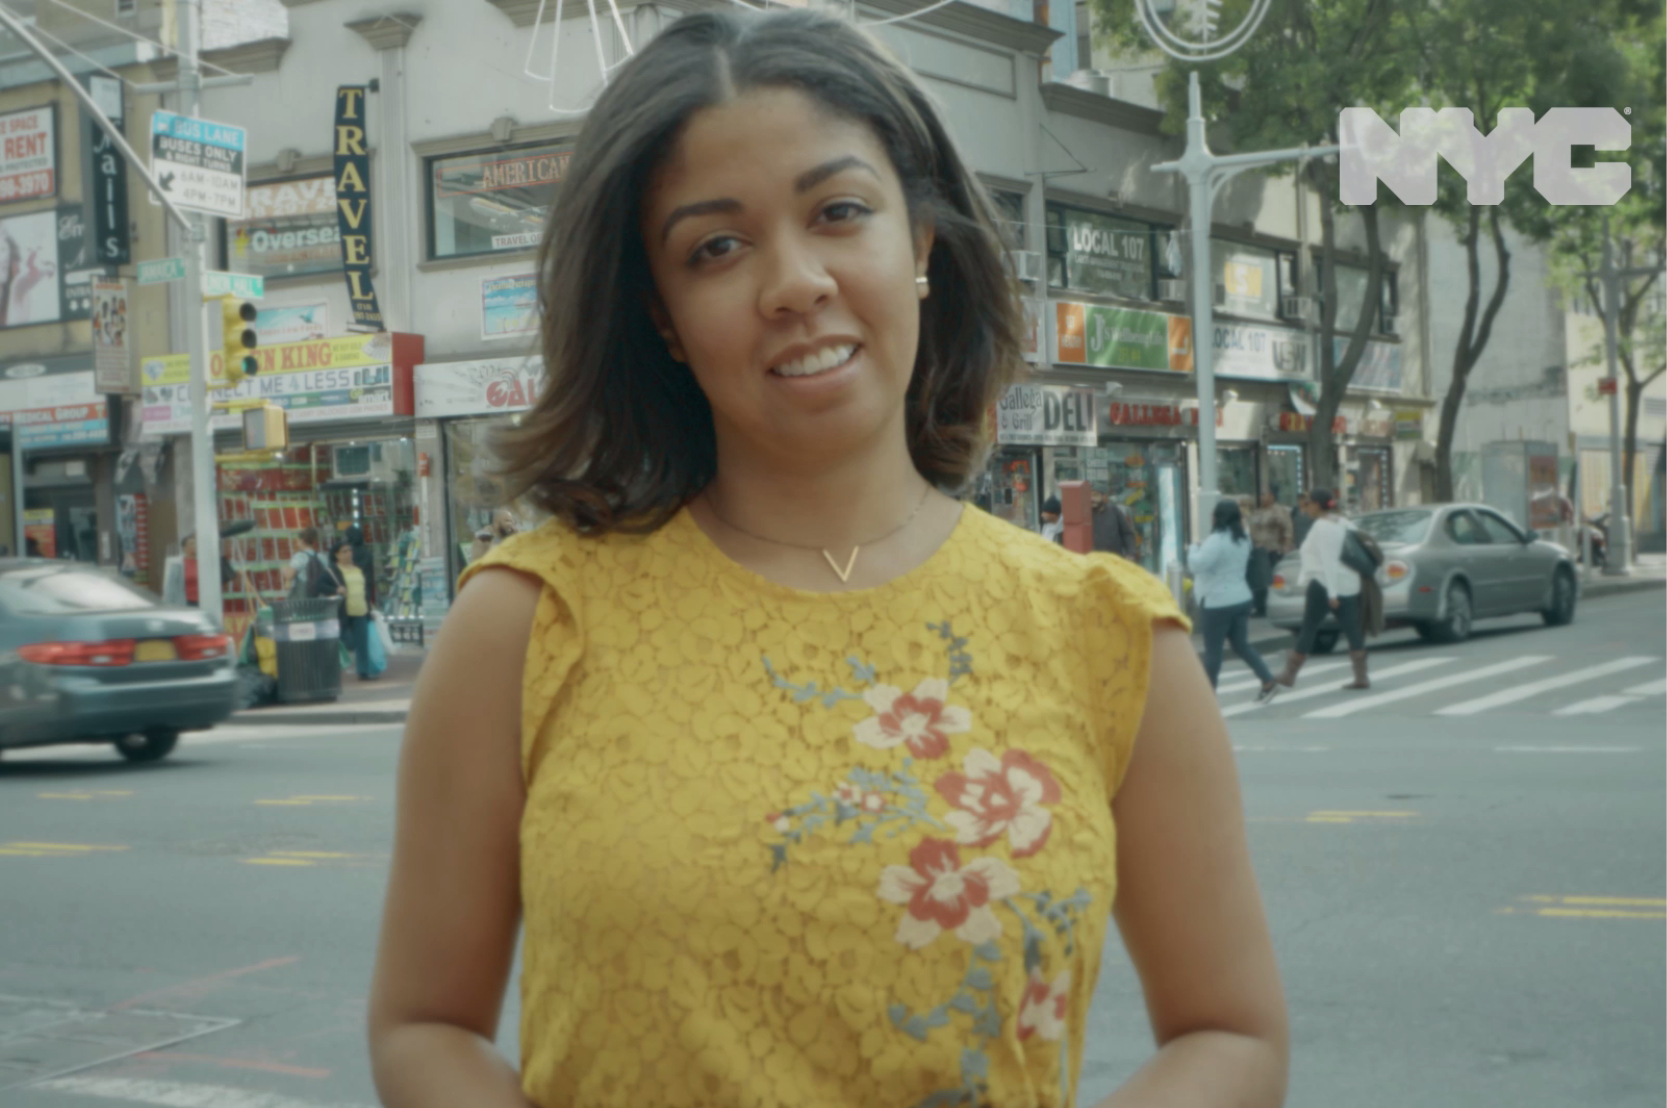 Screenshot from a video of a young woman standing at a NYC intersection.